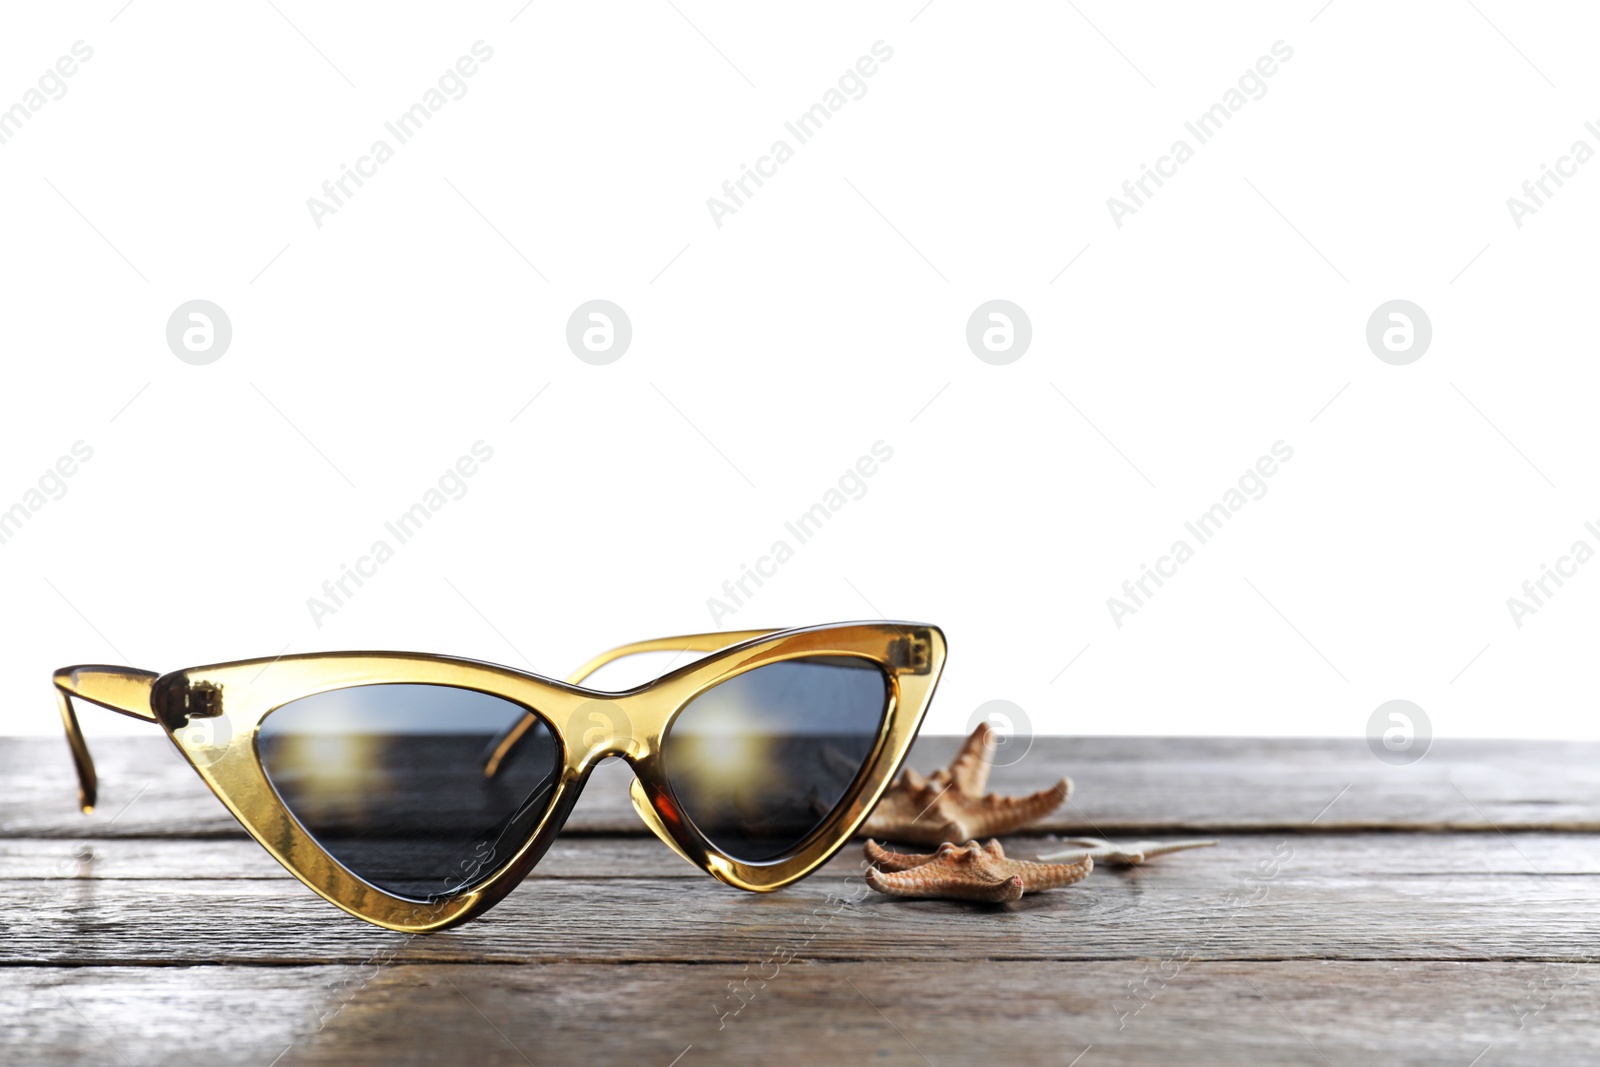 Photo of Stylish sunglasses and starfishes on wooden table against white background. Space for text